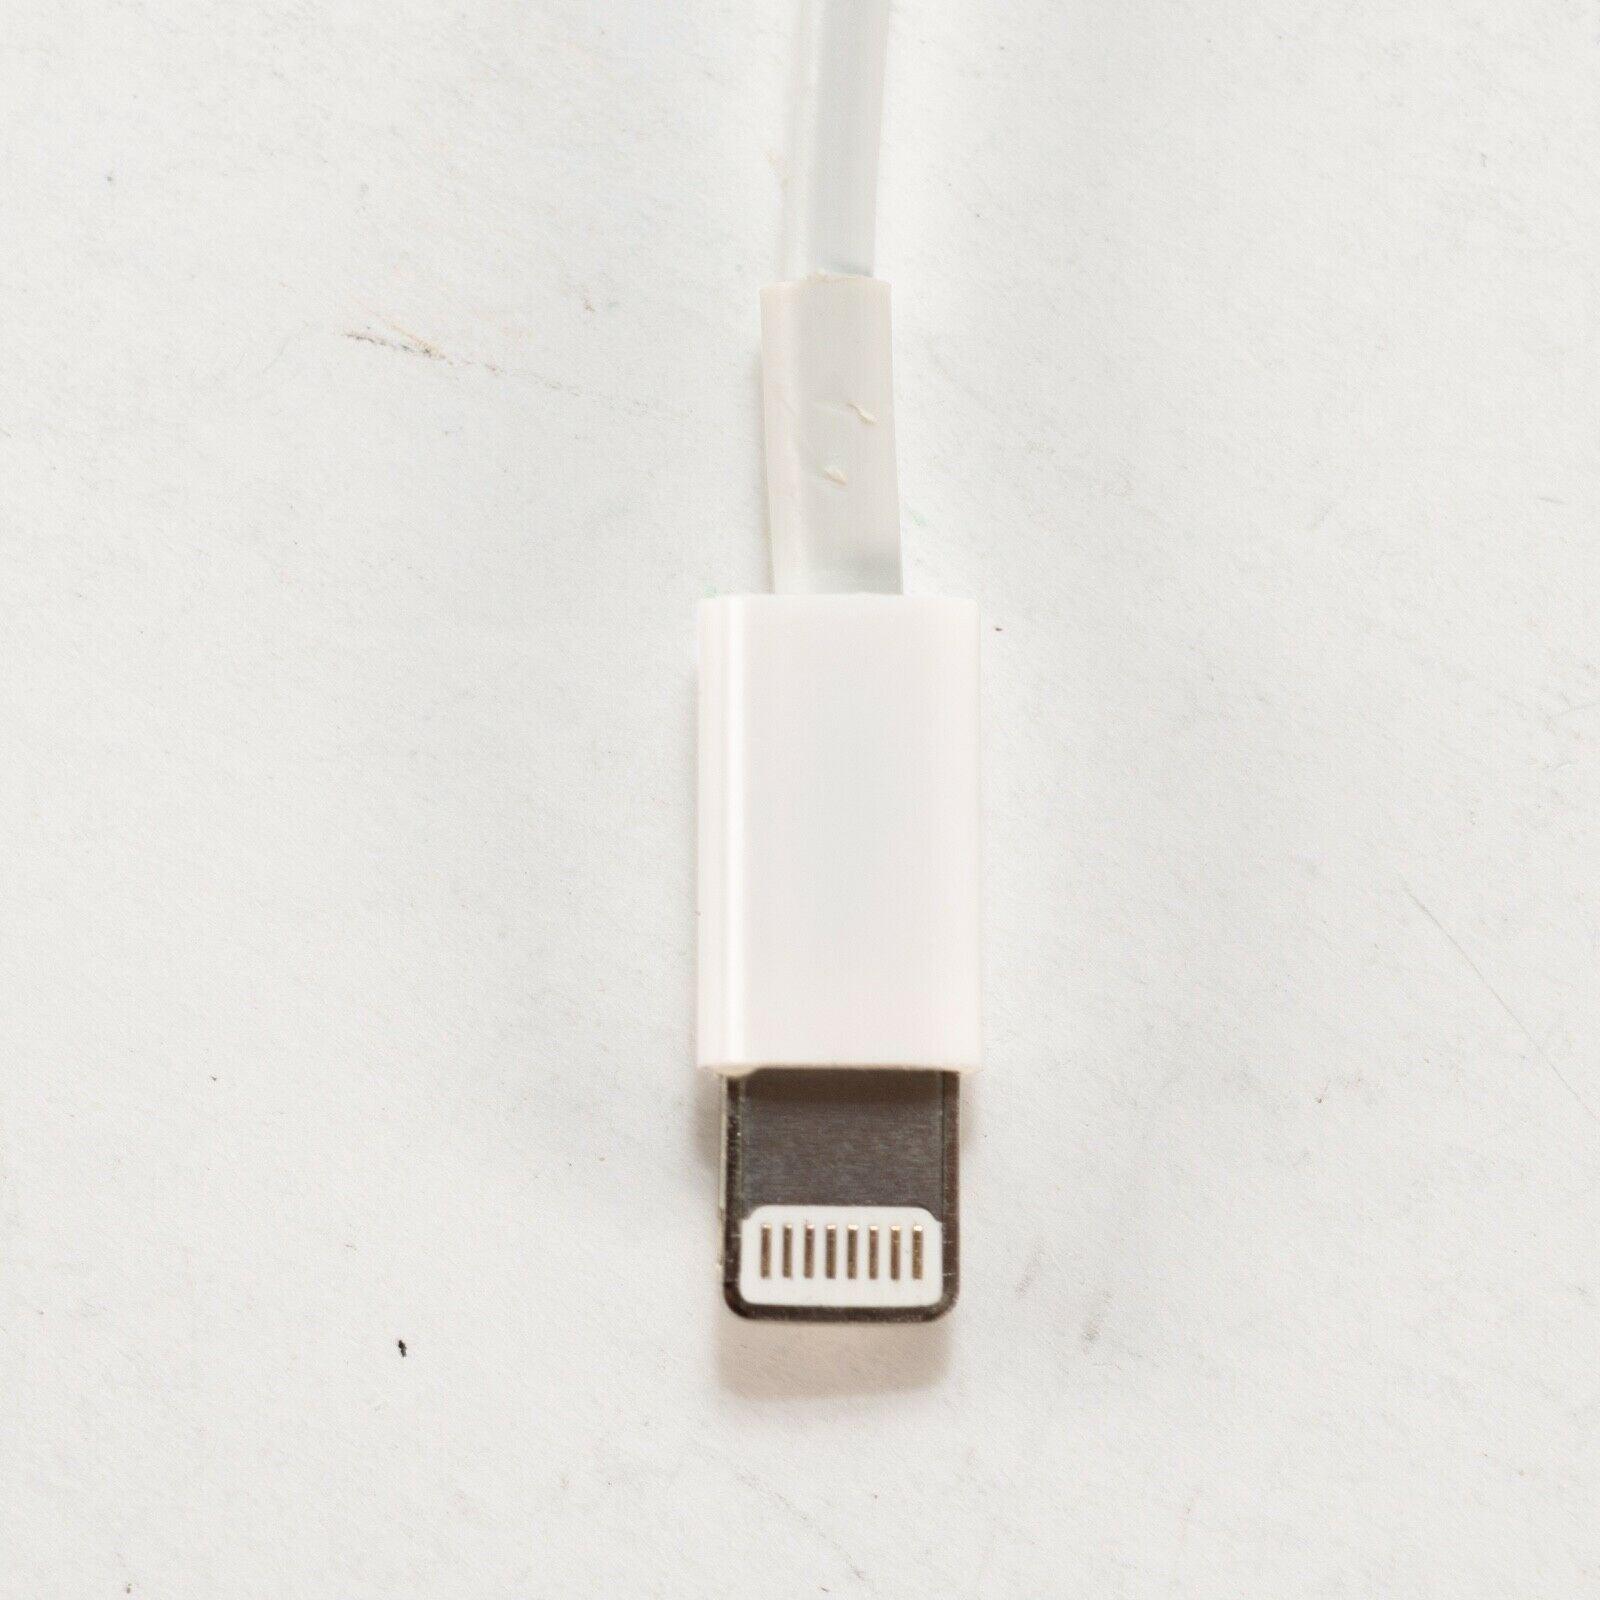 Generic Lighting to USB-A Cable - Works with iPhone, iPod, iPad - 3ft length - ipawnishop.com